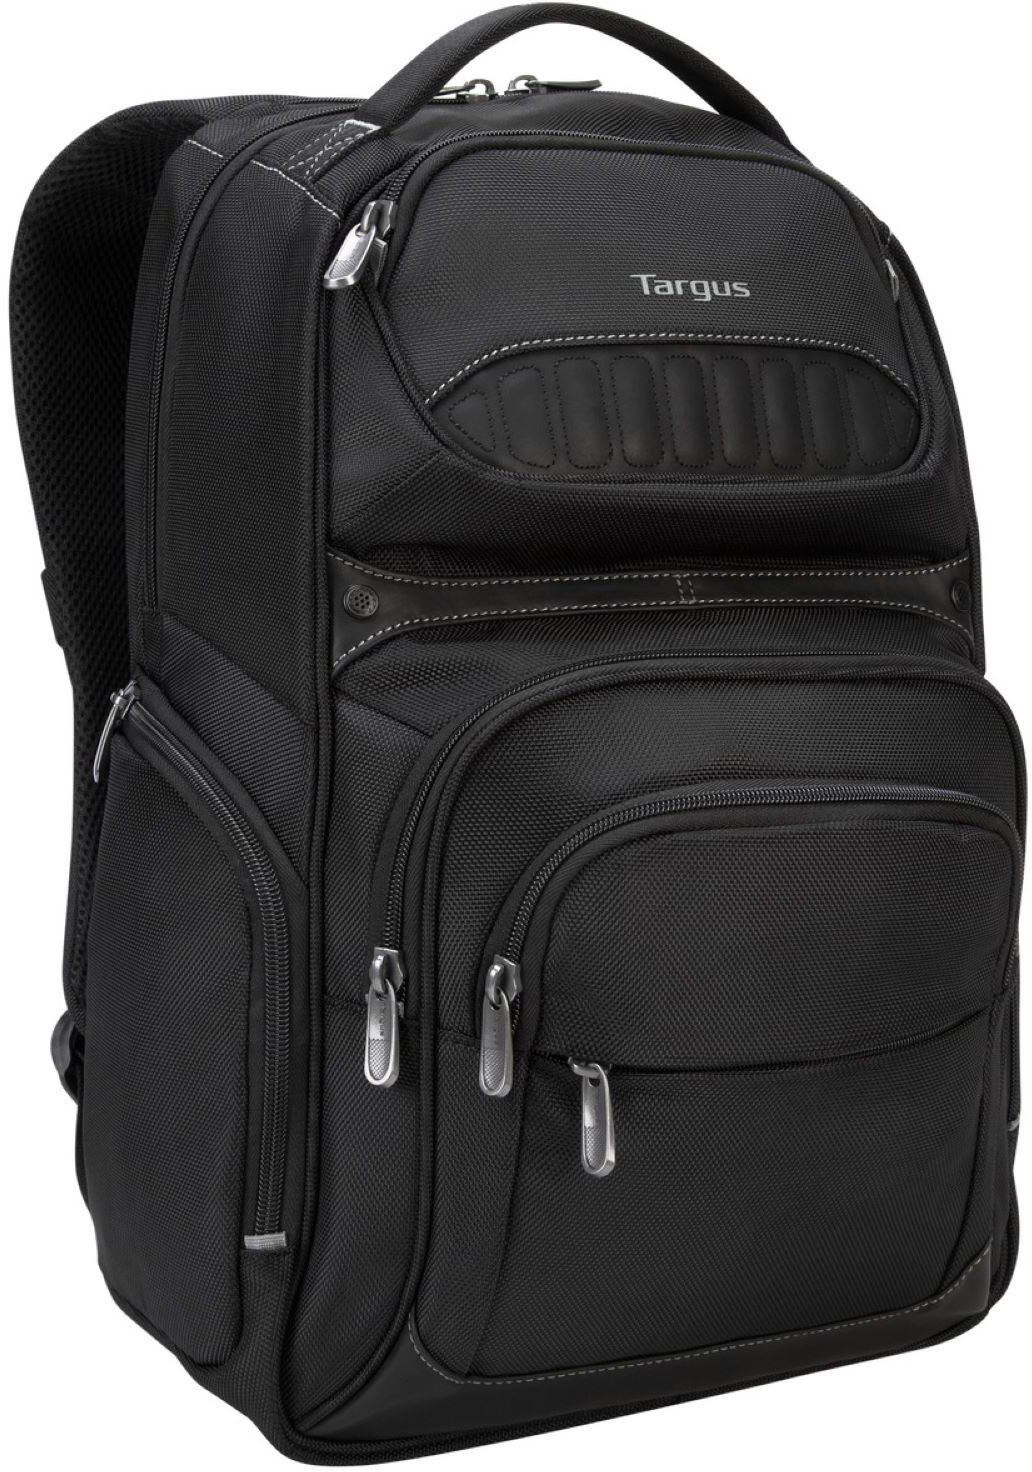 Angle View: Thule - EnRoute 27L Escort 2 Backpack for 15.6" Laptop w/ 10.1" Padded Tablet Sleeve, Crushproof SafeZone, & Water Bottle Holder - Black